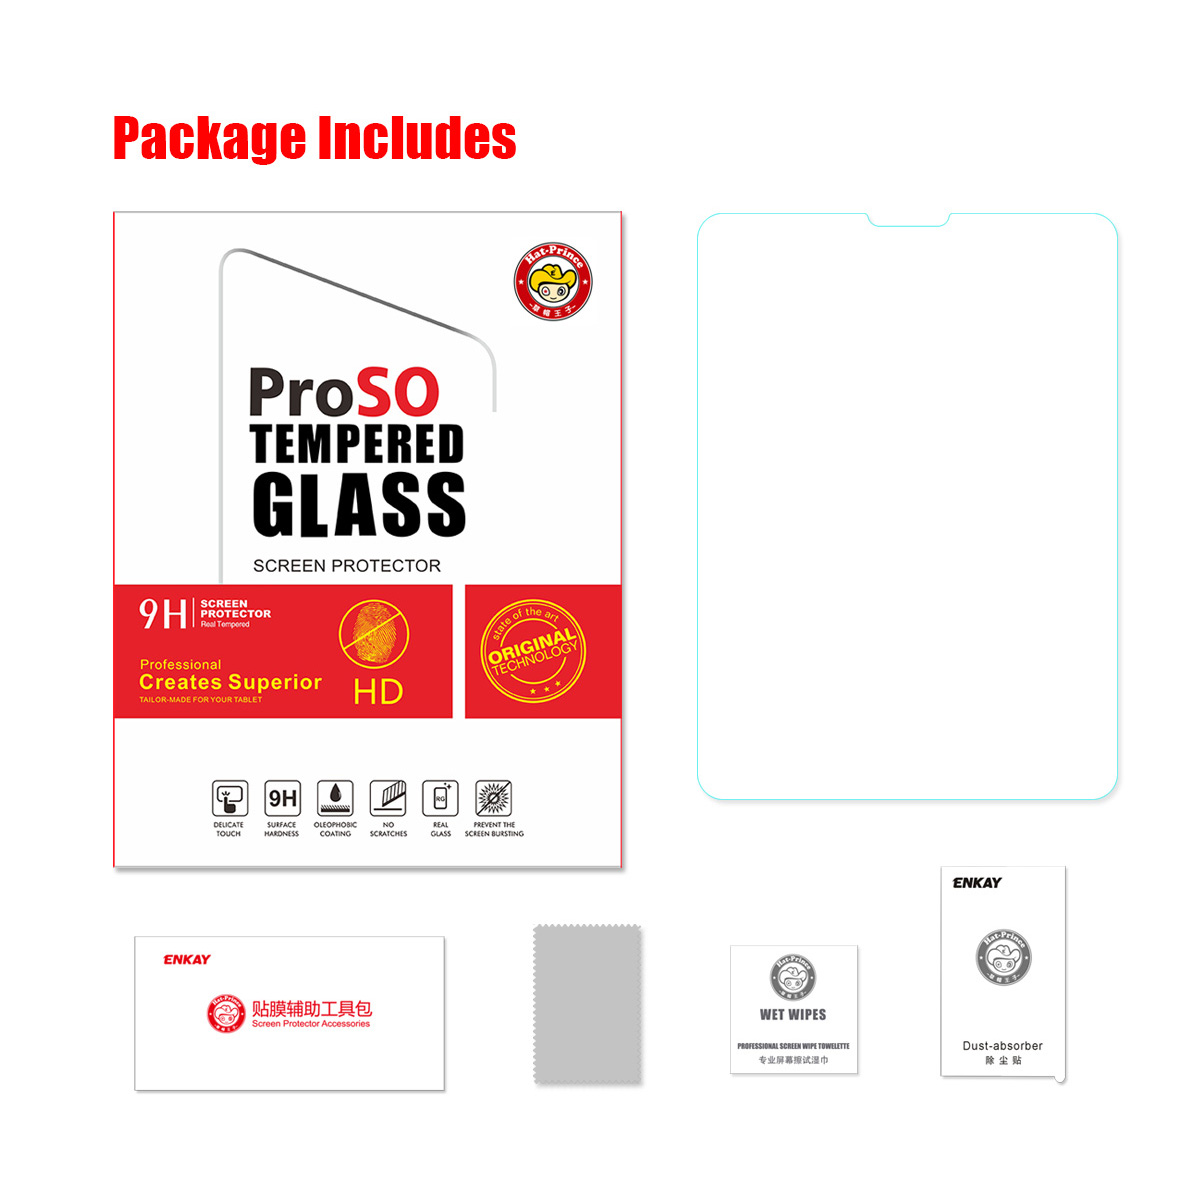 ENKAY-12Pcs-9H-Crystal-Clear-Anti-Explosion-Anti-Scratch-Tempered-Glass-Screen-Protector-for-iPad-Pr-1730562-7